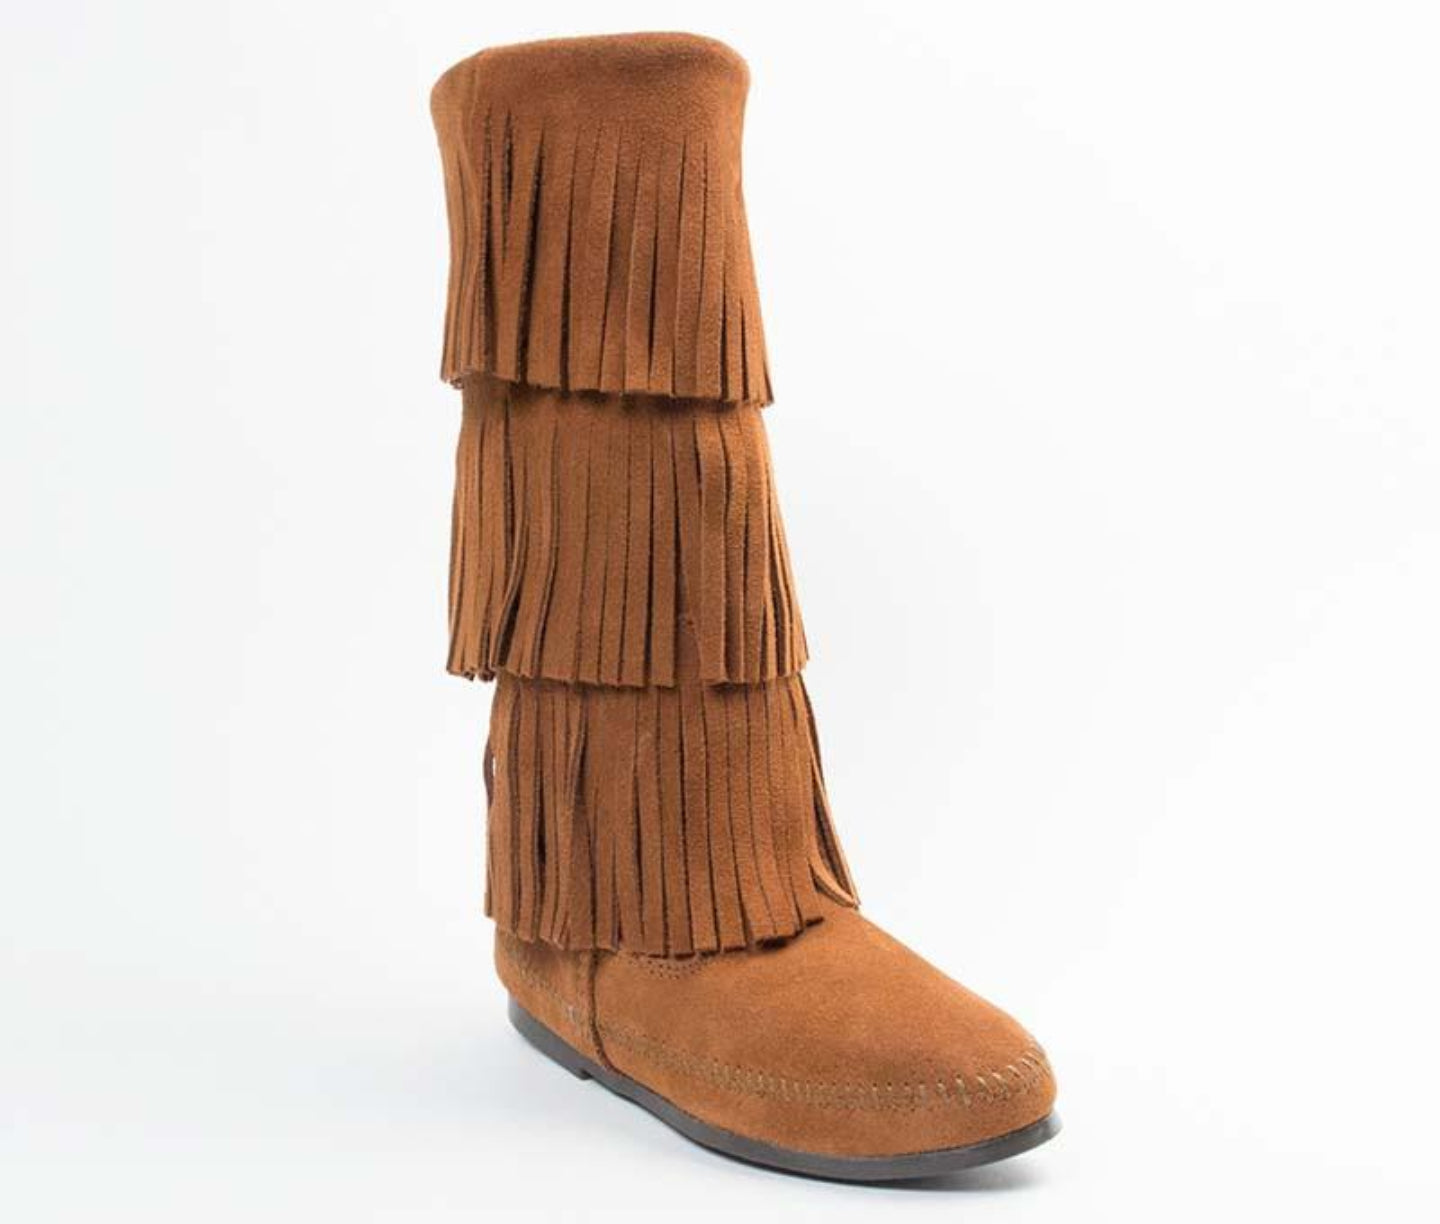 3-Layer Fringe Boot in Brown from 3/4 Angle View